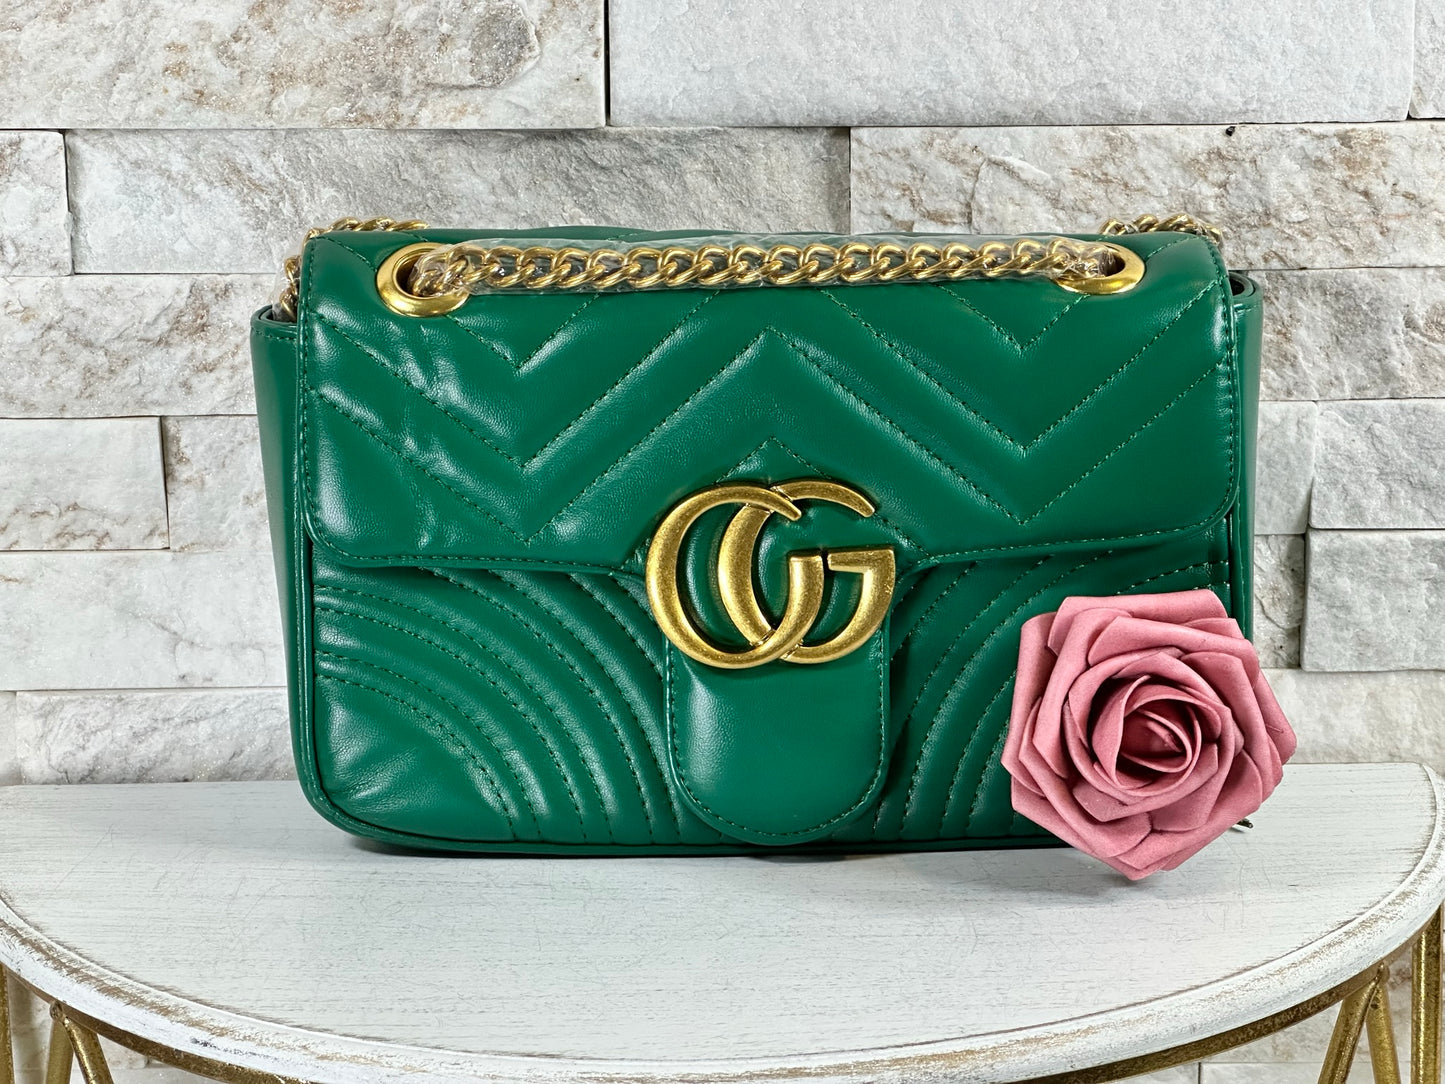 GG Green Marmont Inspired Bag